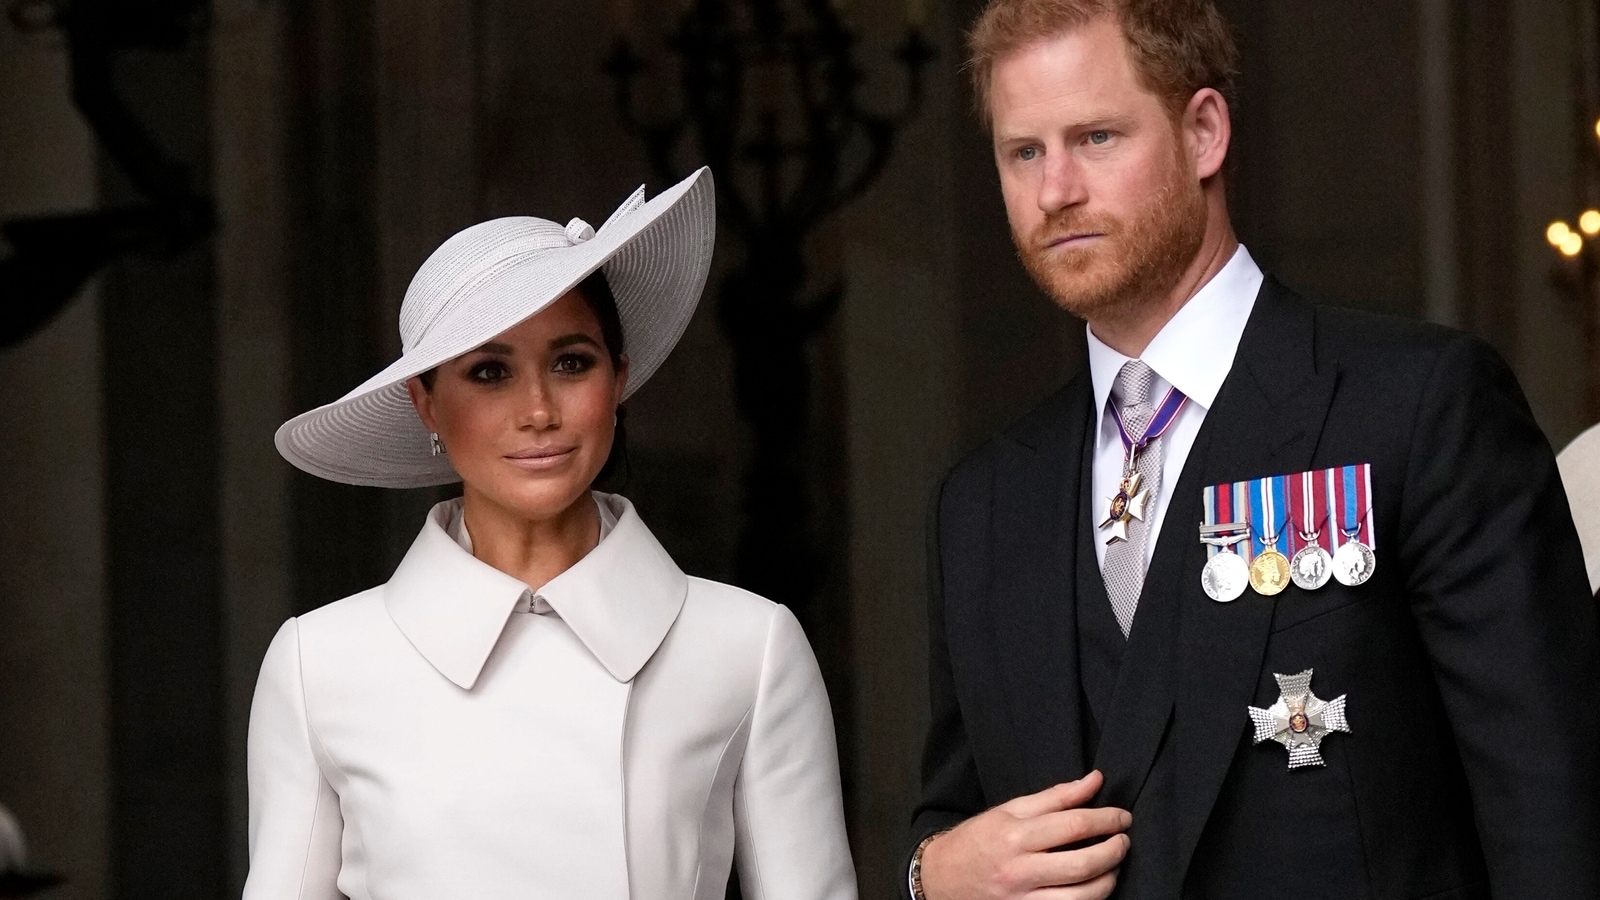 Meghan Markle and Prince Harry ‘uninvited’ to Queen Elizabeth’s funeral reception, couple reportedly ‘baffled’